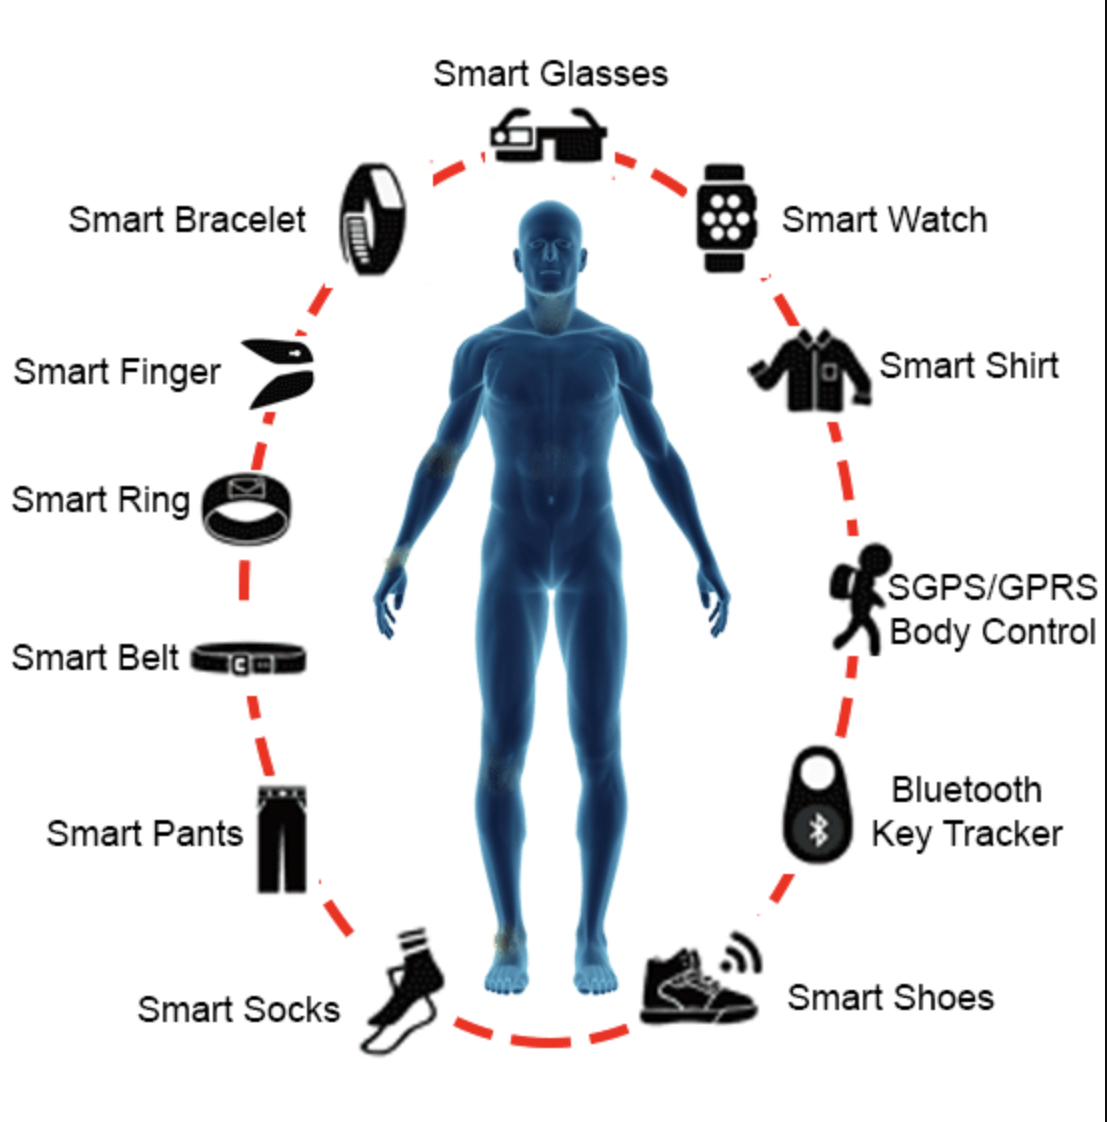 wearable technology-IoT Trends